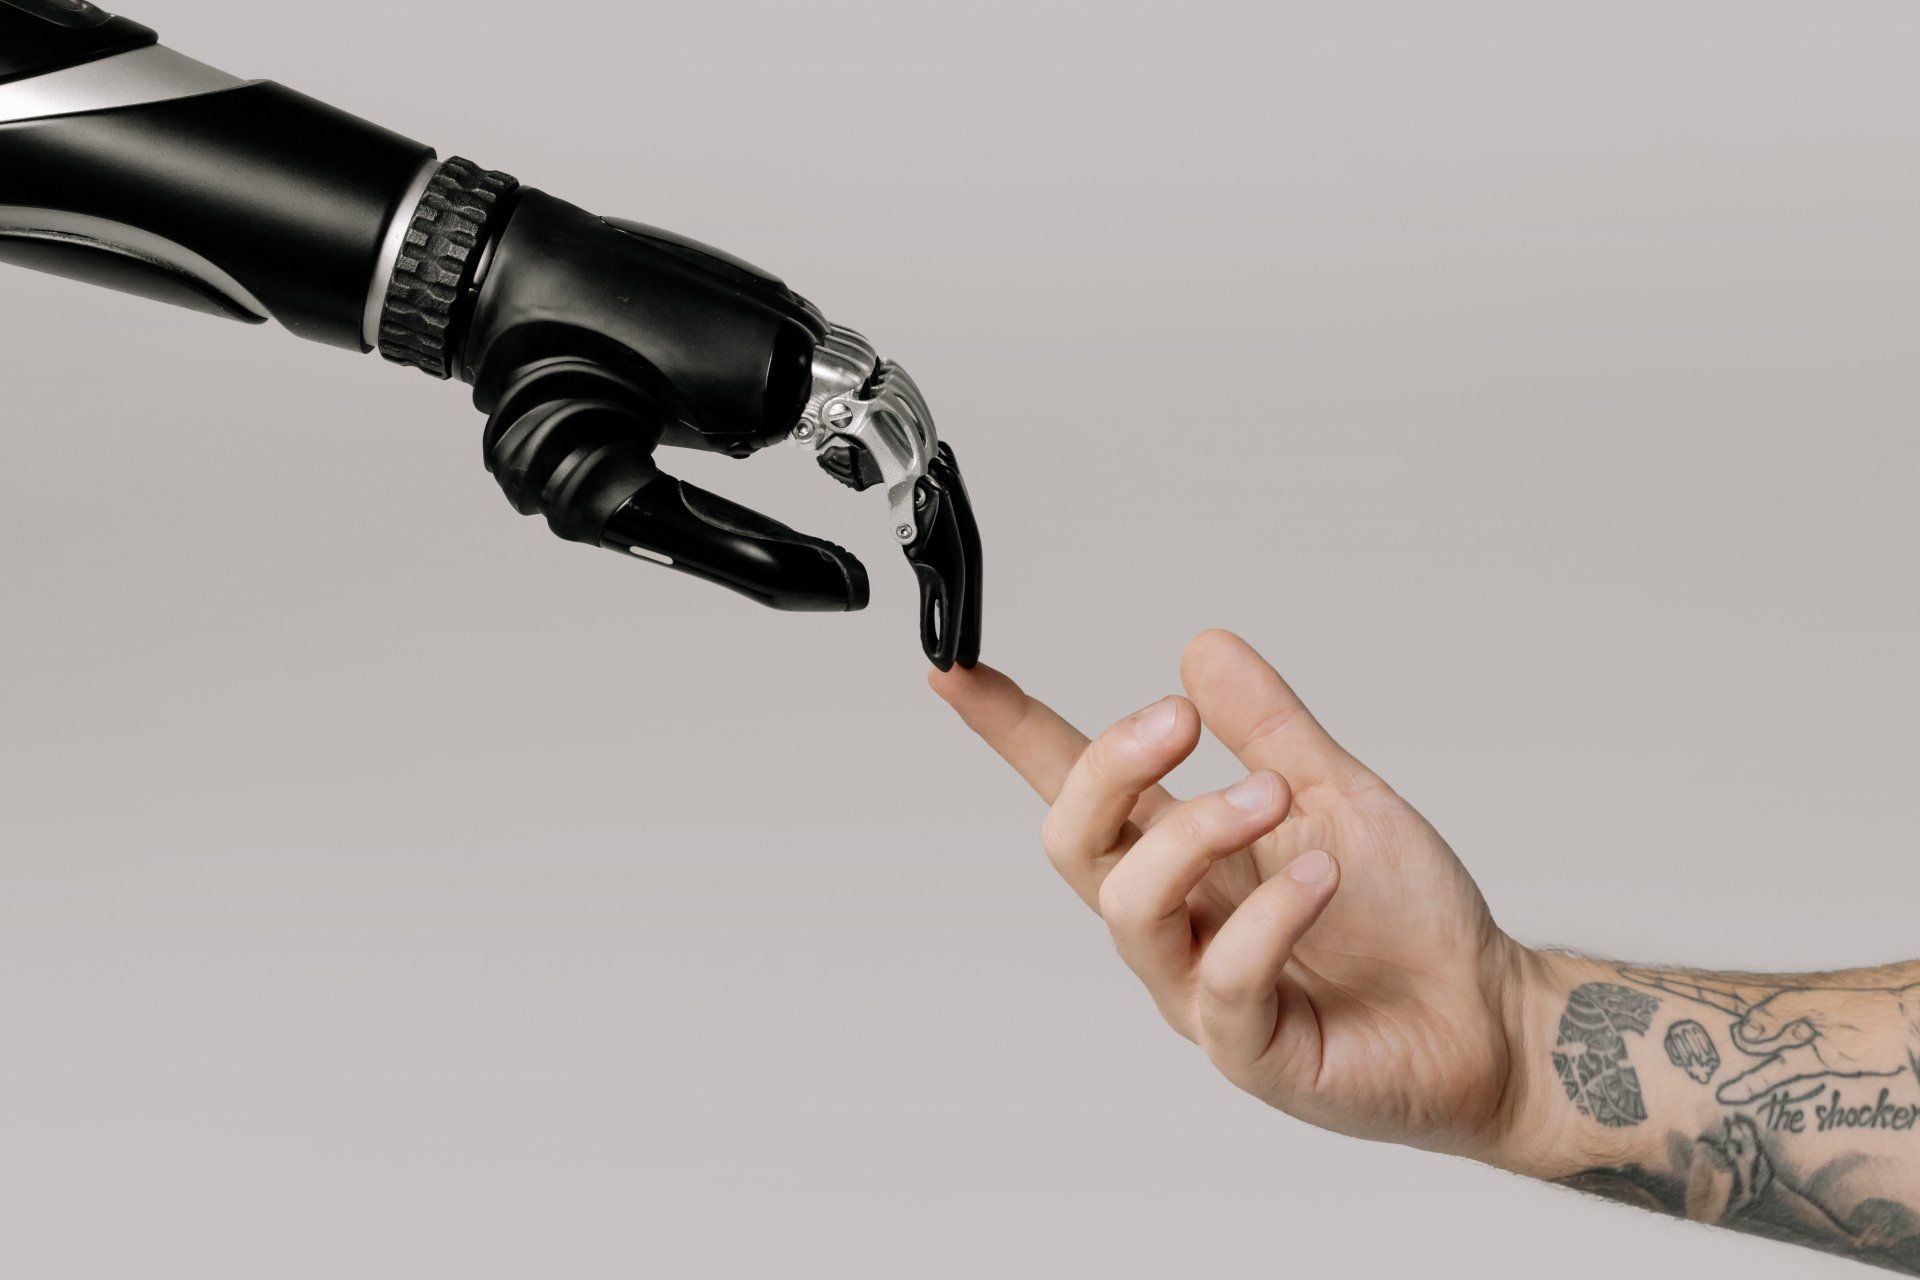 Black robotic hand with index and middle fingers touching the index finger of a white individual who has tattoos on their forearm.